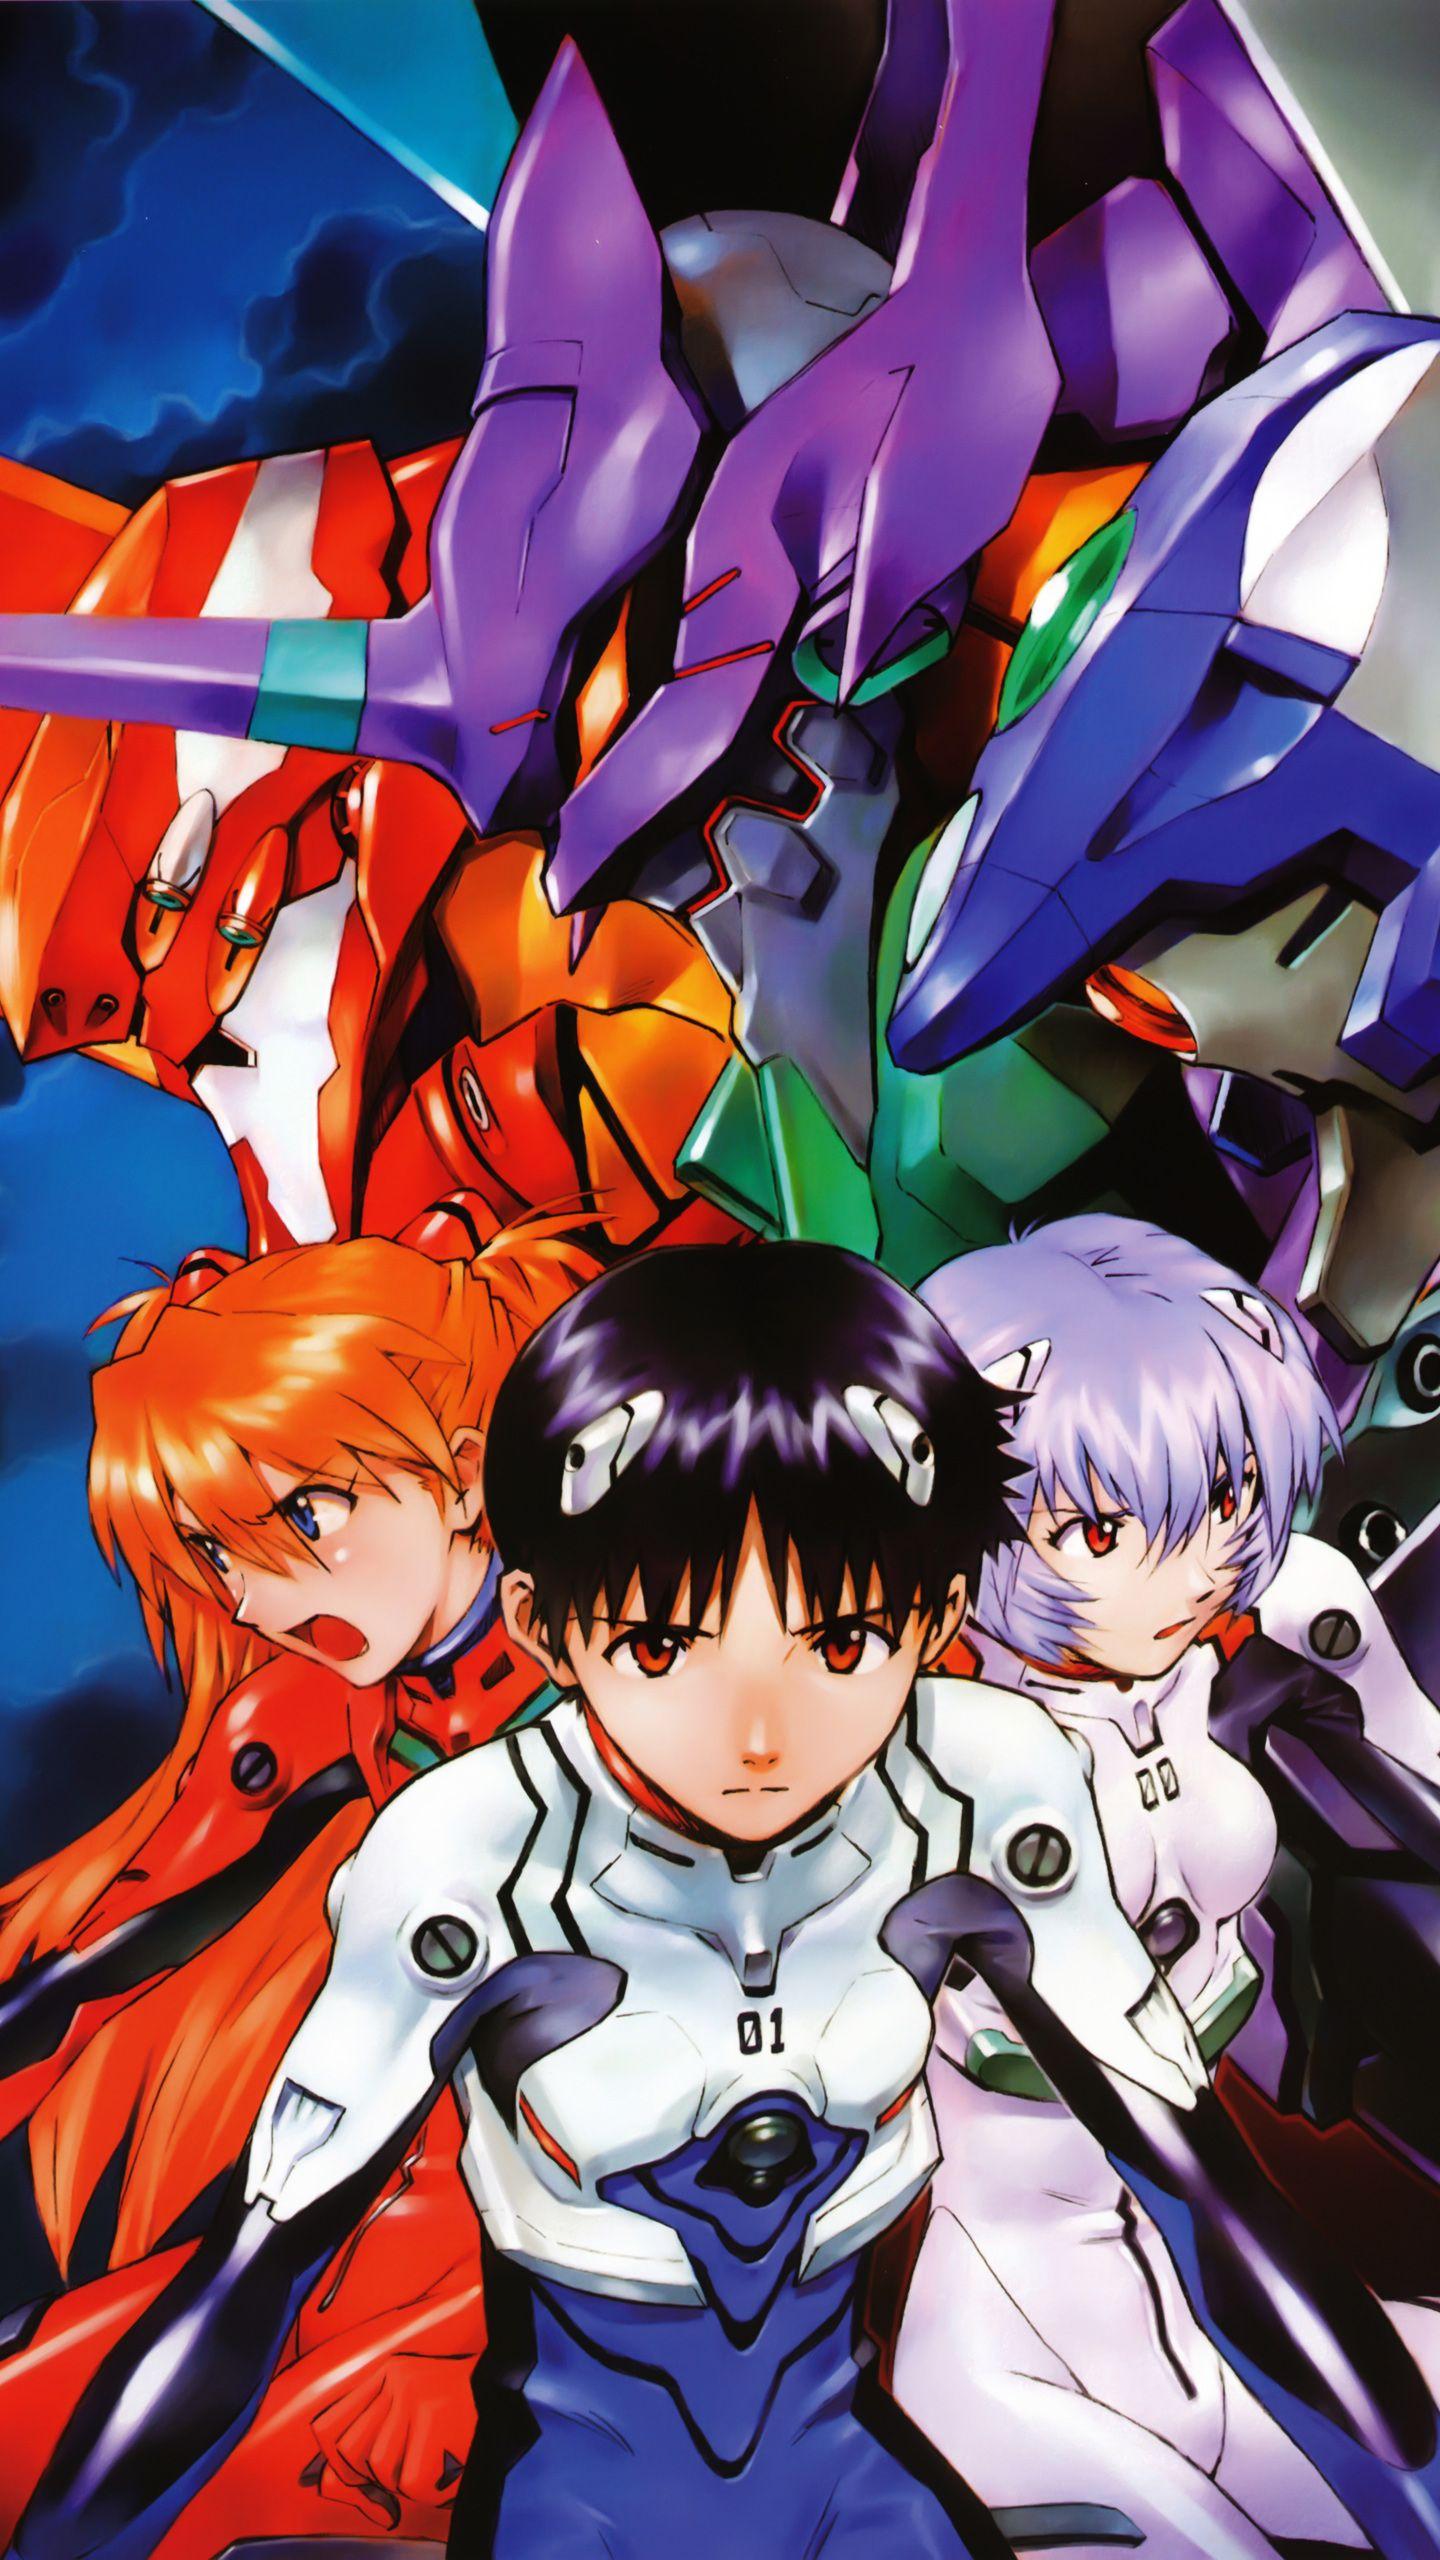 Evangelion Manga wallpapers collection